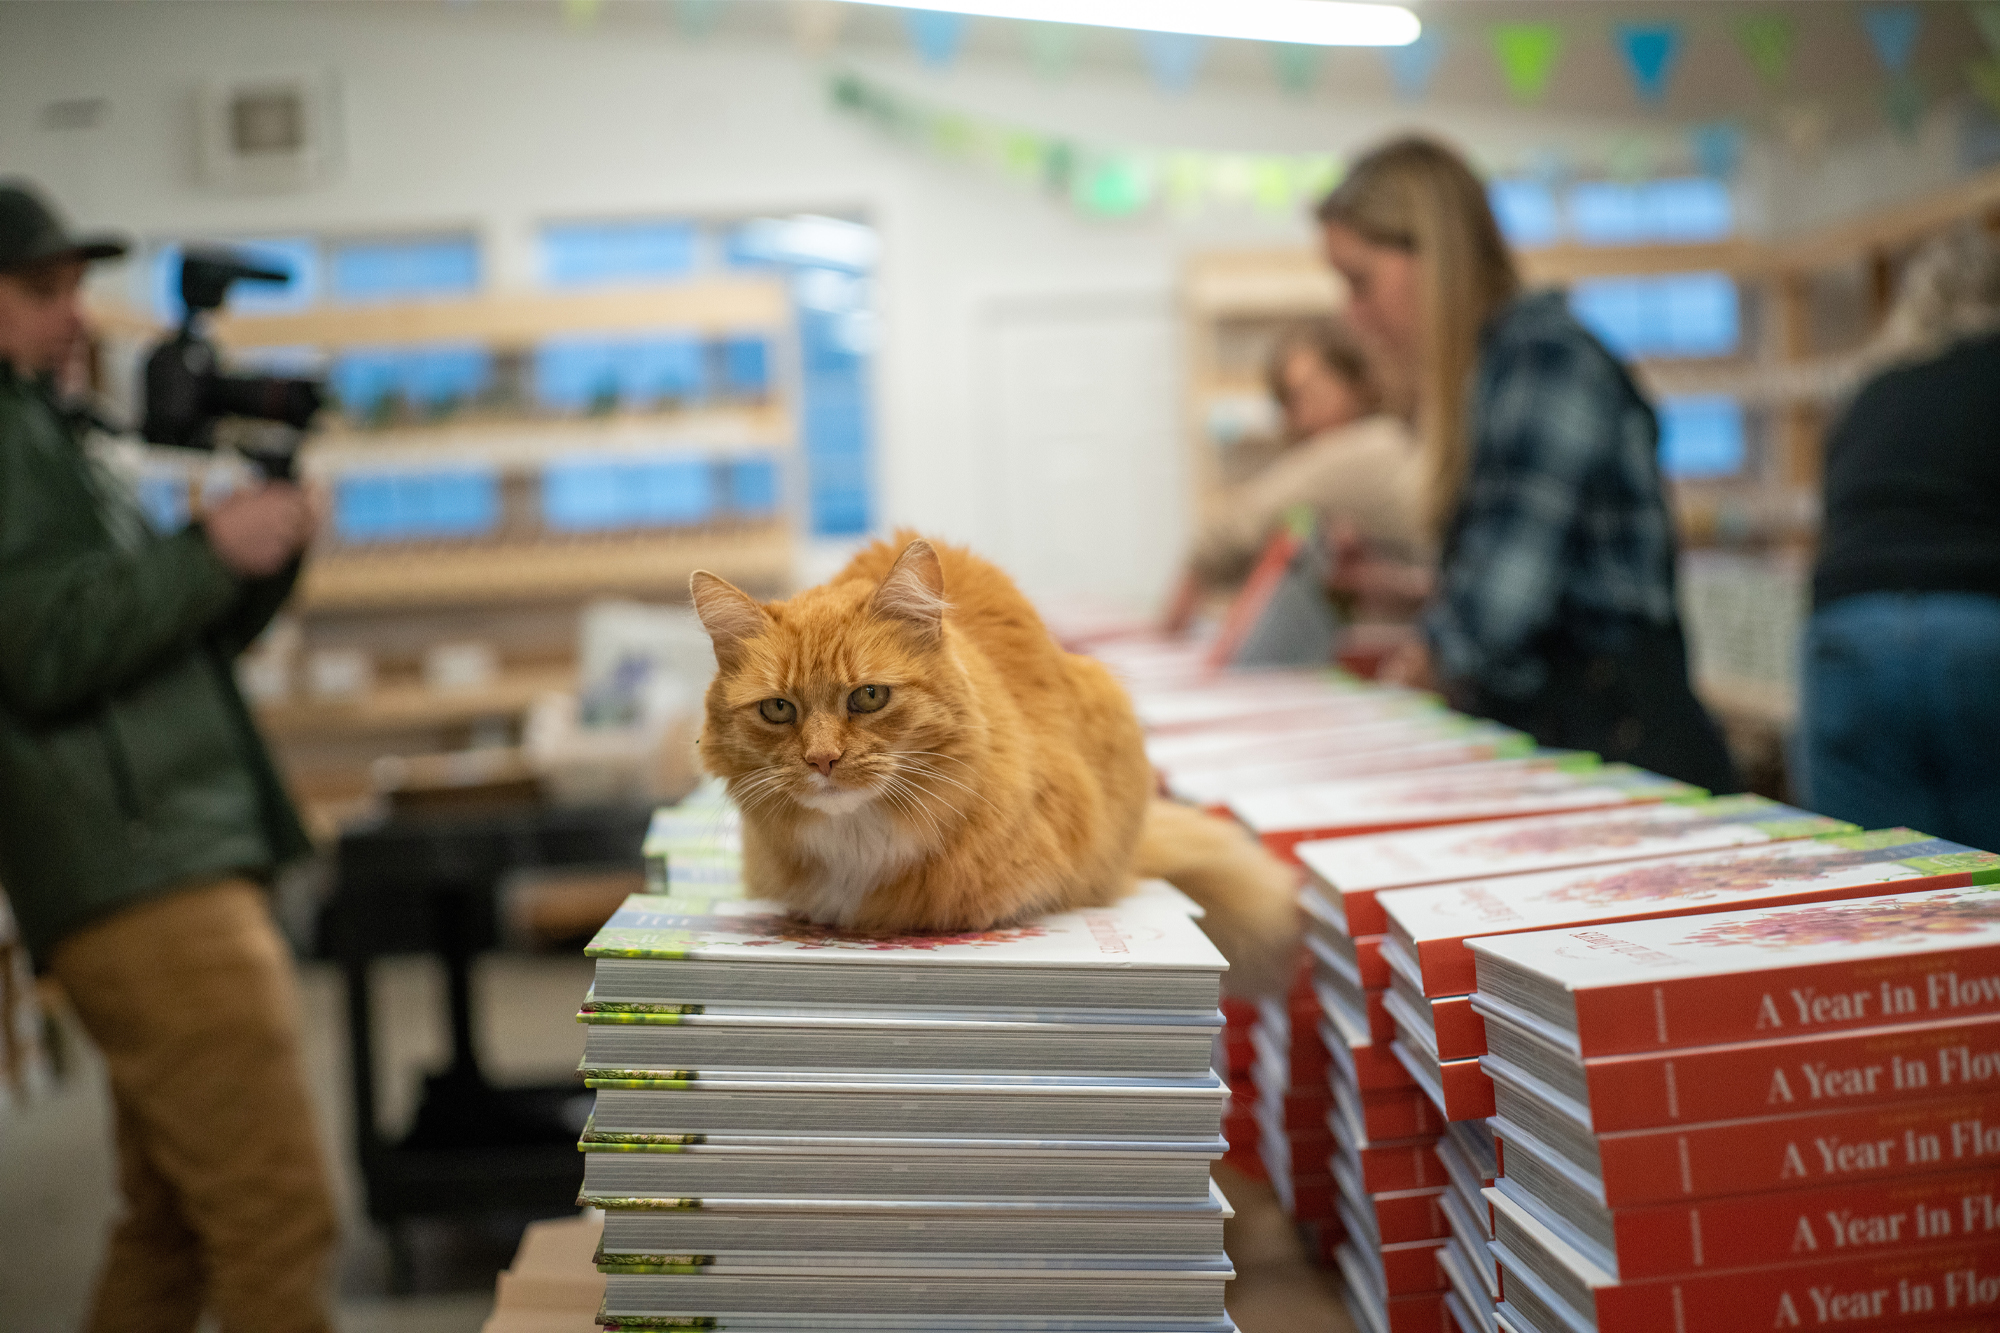 Timmy the cat lays on stacks of "A Year in Flowers" while Erin and Chris Benzakein film in the background.